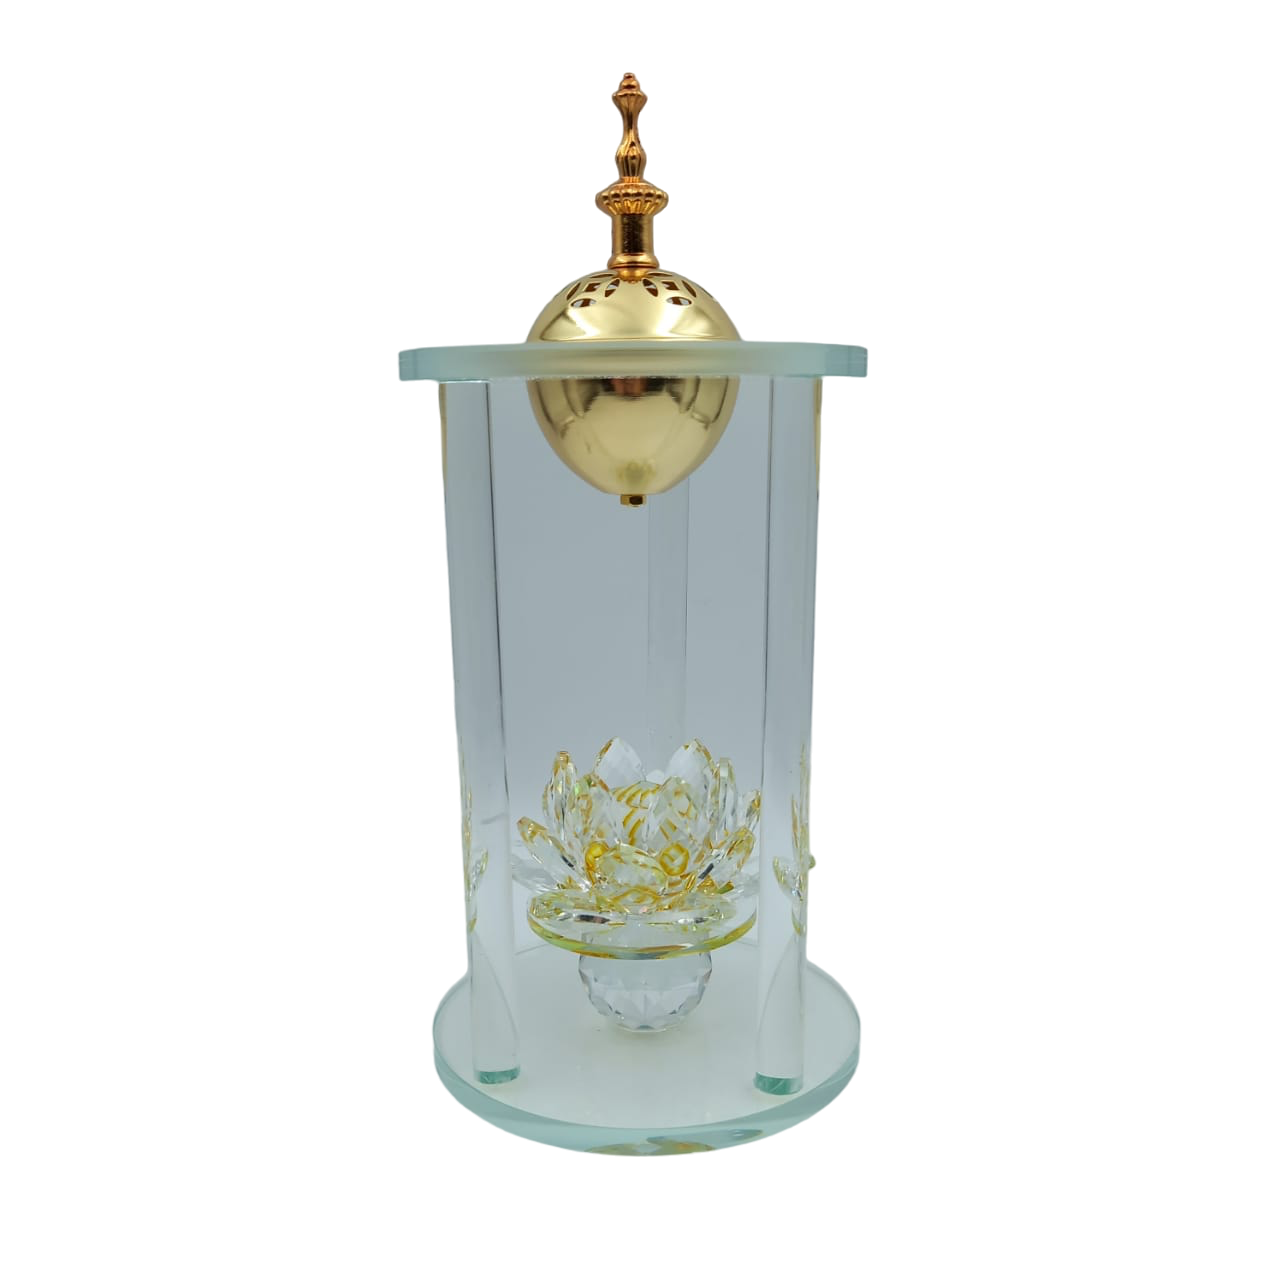 Round Crytsal Burner with Flower Detail - Gold Large